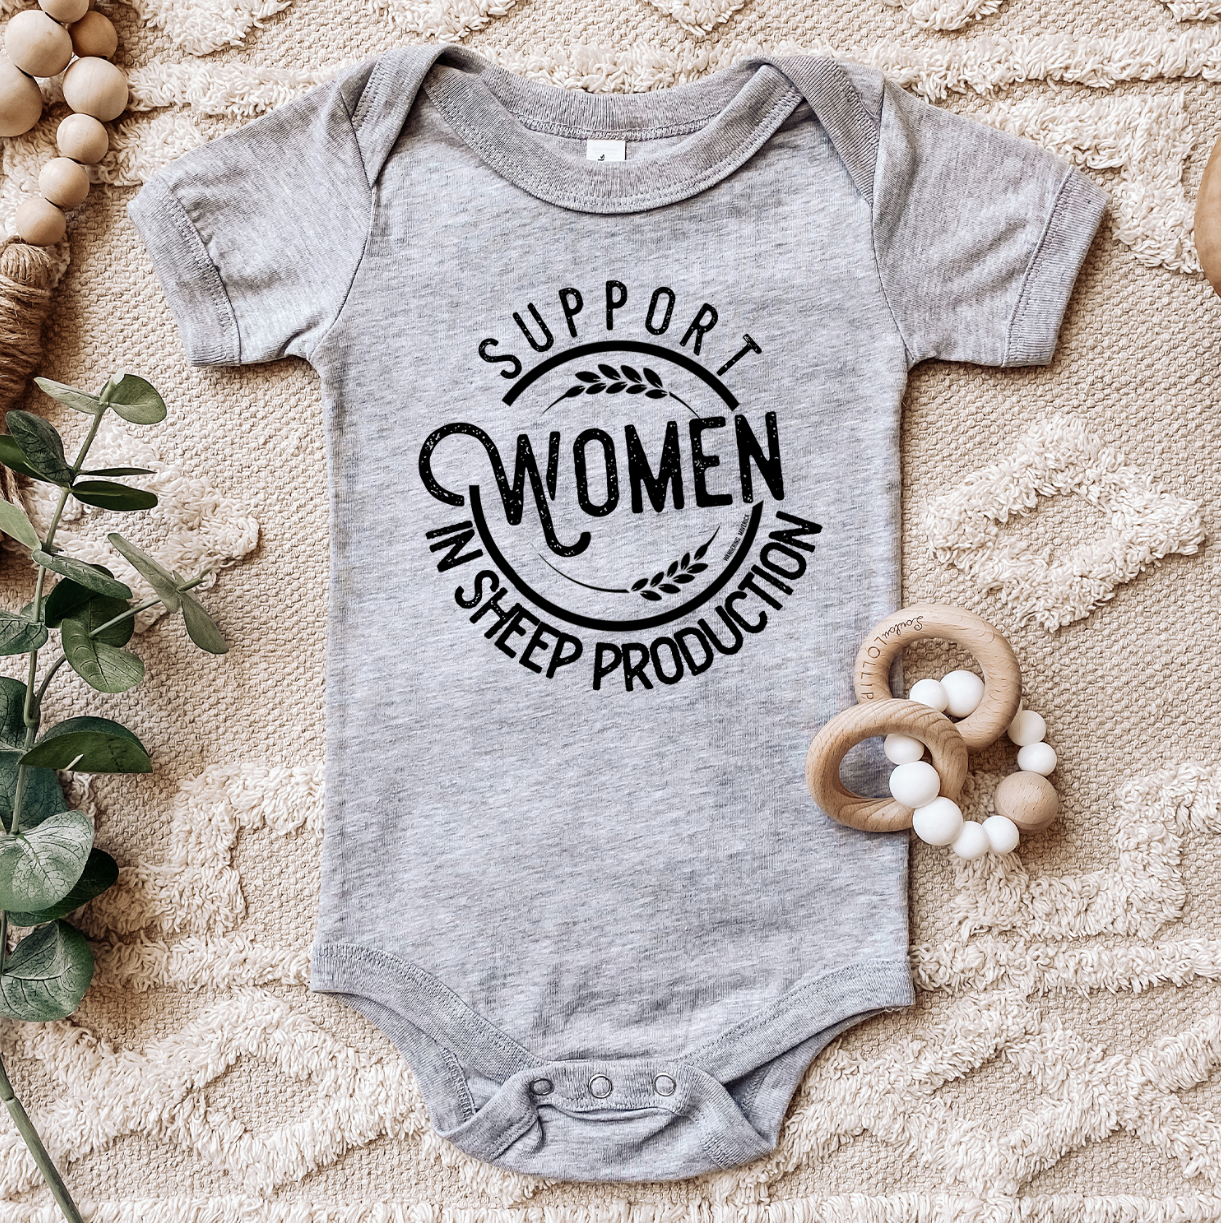 Support Women In Sheep Production One Piece/T-Shirt (Newborn - Youth XL) - Multiple Colors!